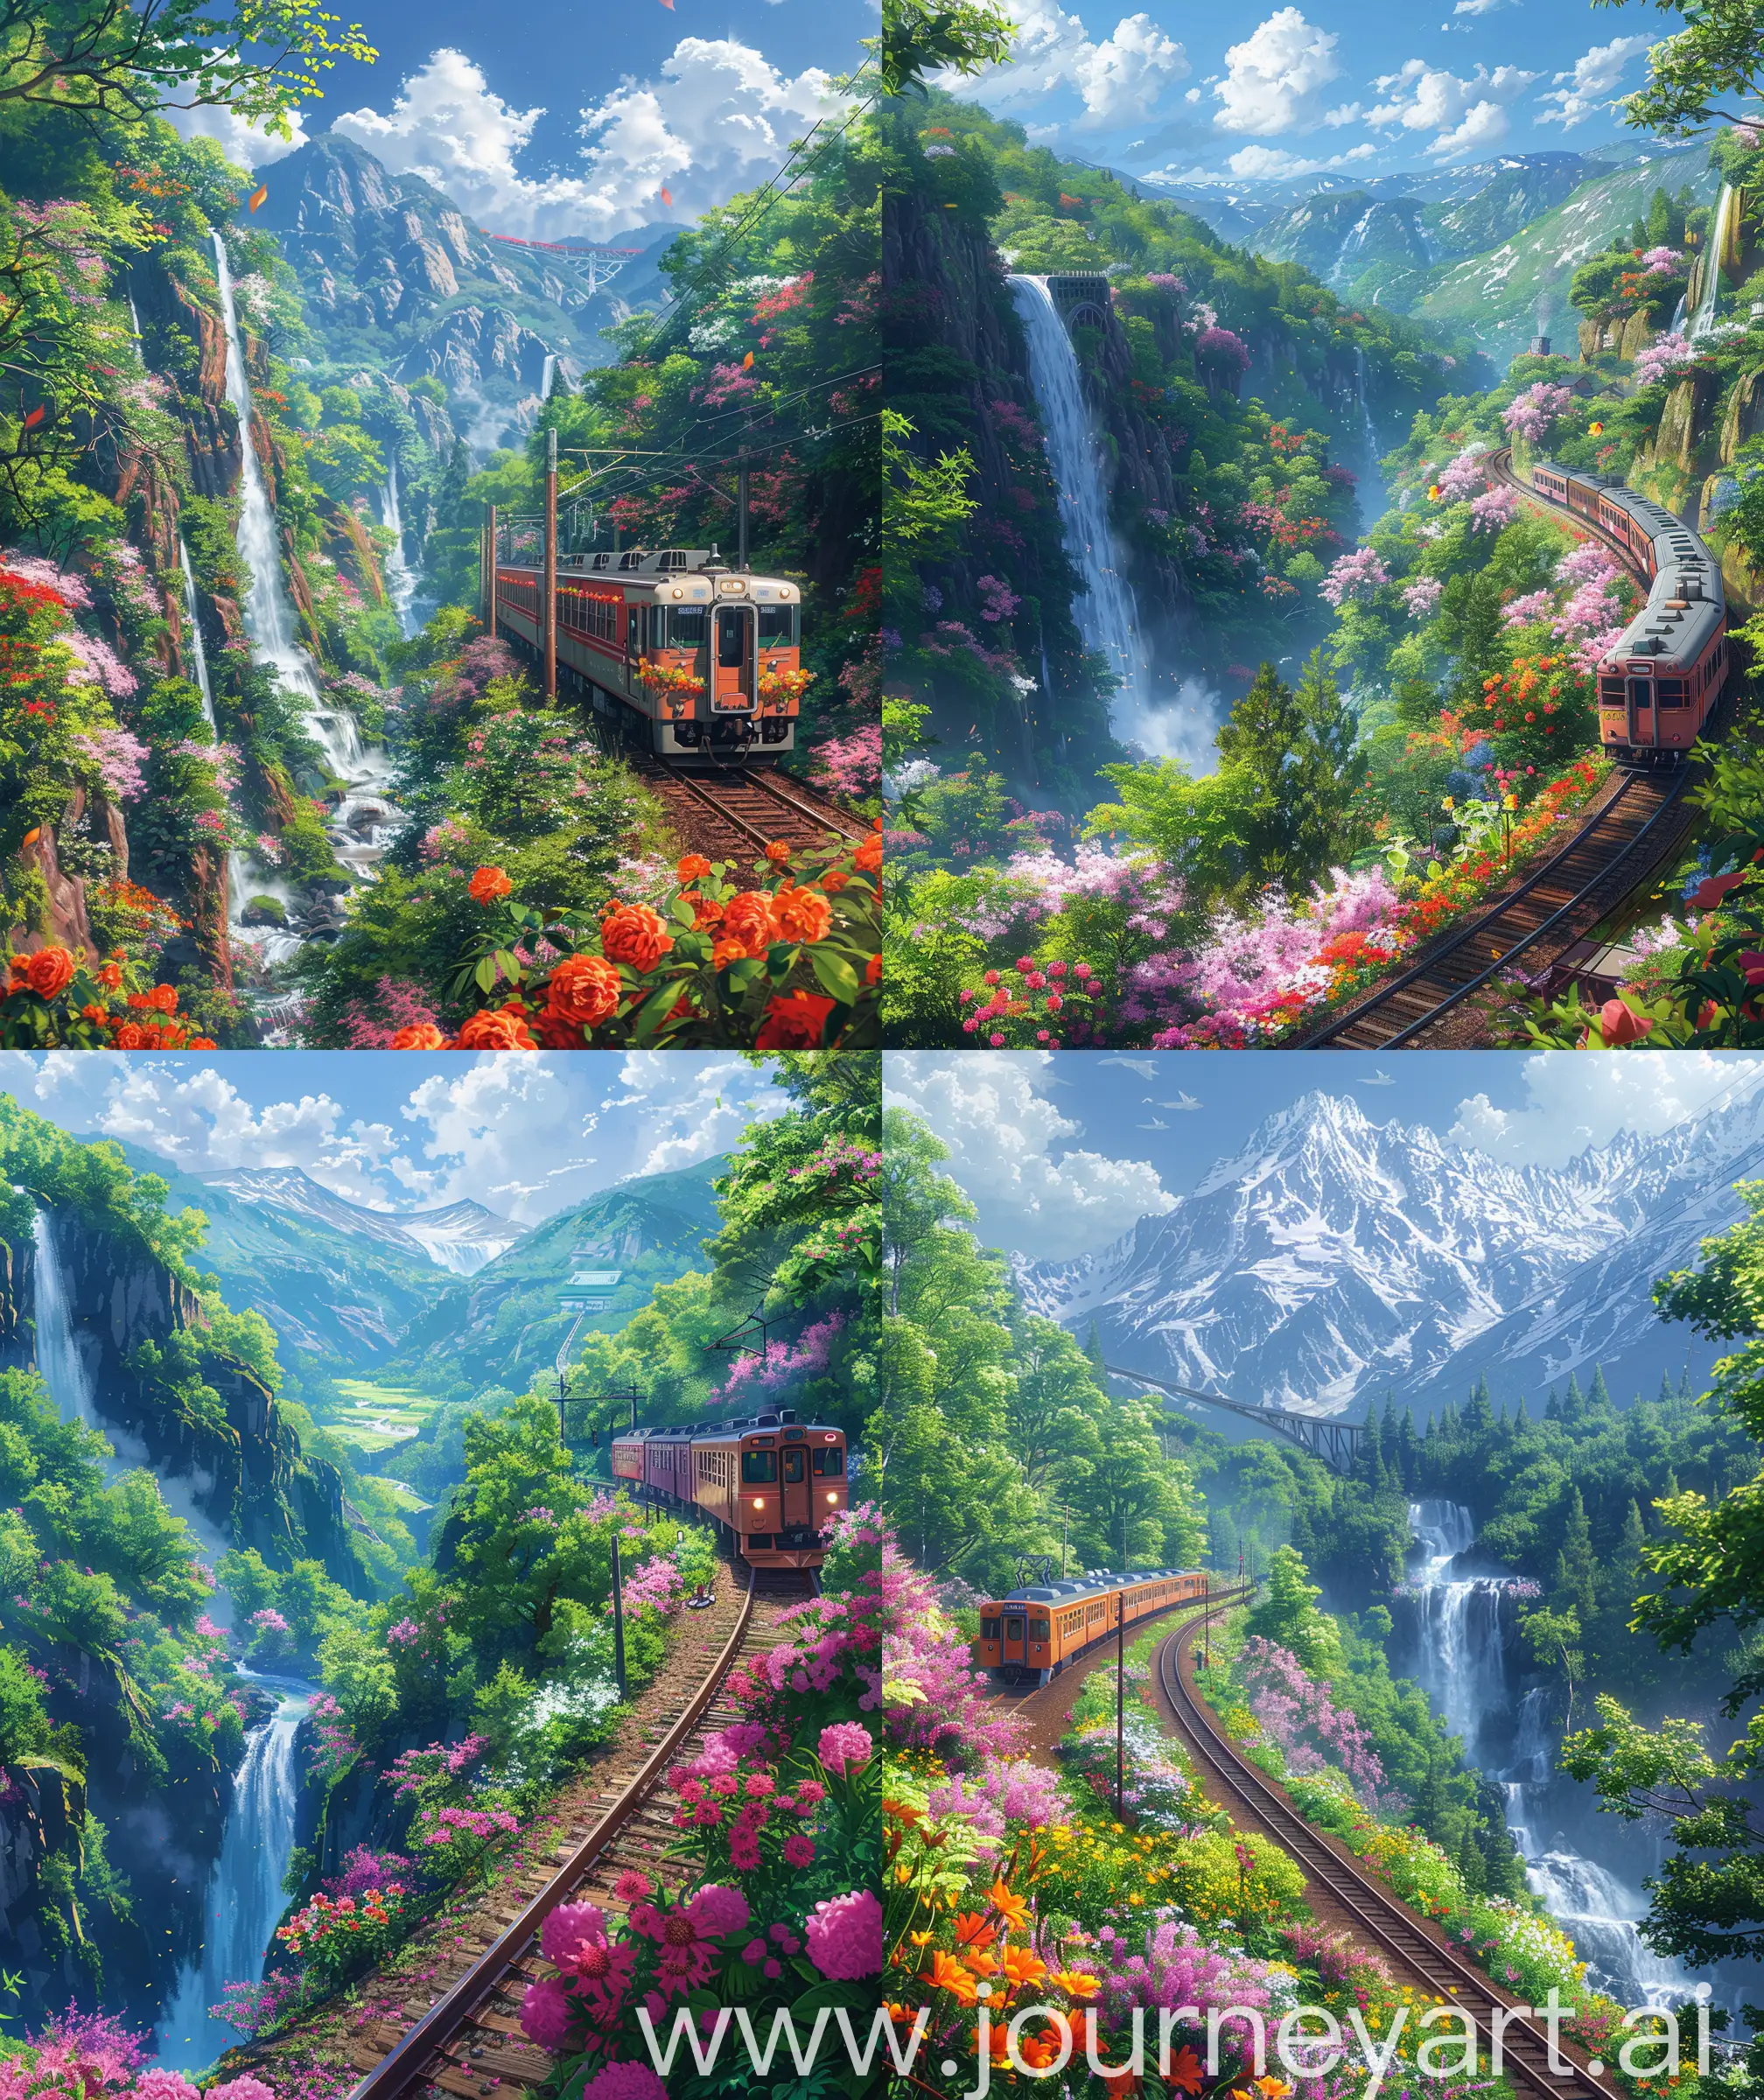 Beautiful anime scenery, mokoto shinkai style, beautiful train , decorating with flowers, waterfall and valley view besides train track, "amazing and adventure look", beautiful anime scenery, illustration, ultra hd, High quality, sharp details,no blurry image no hyperrealistic --ar 27:32 --s 600